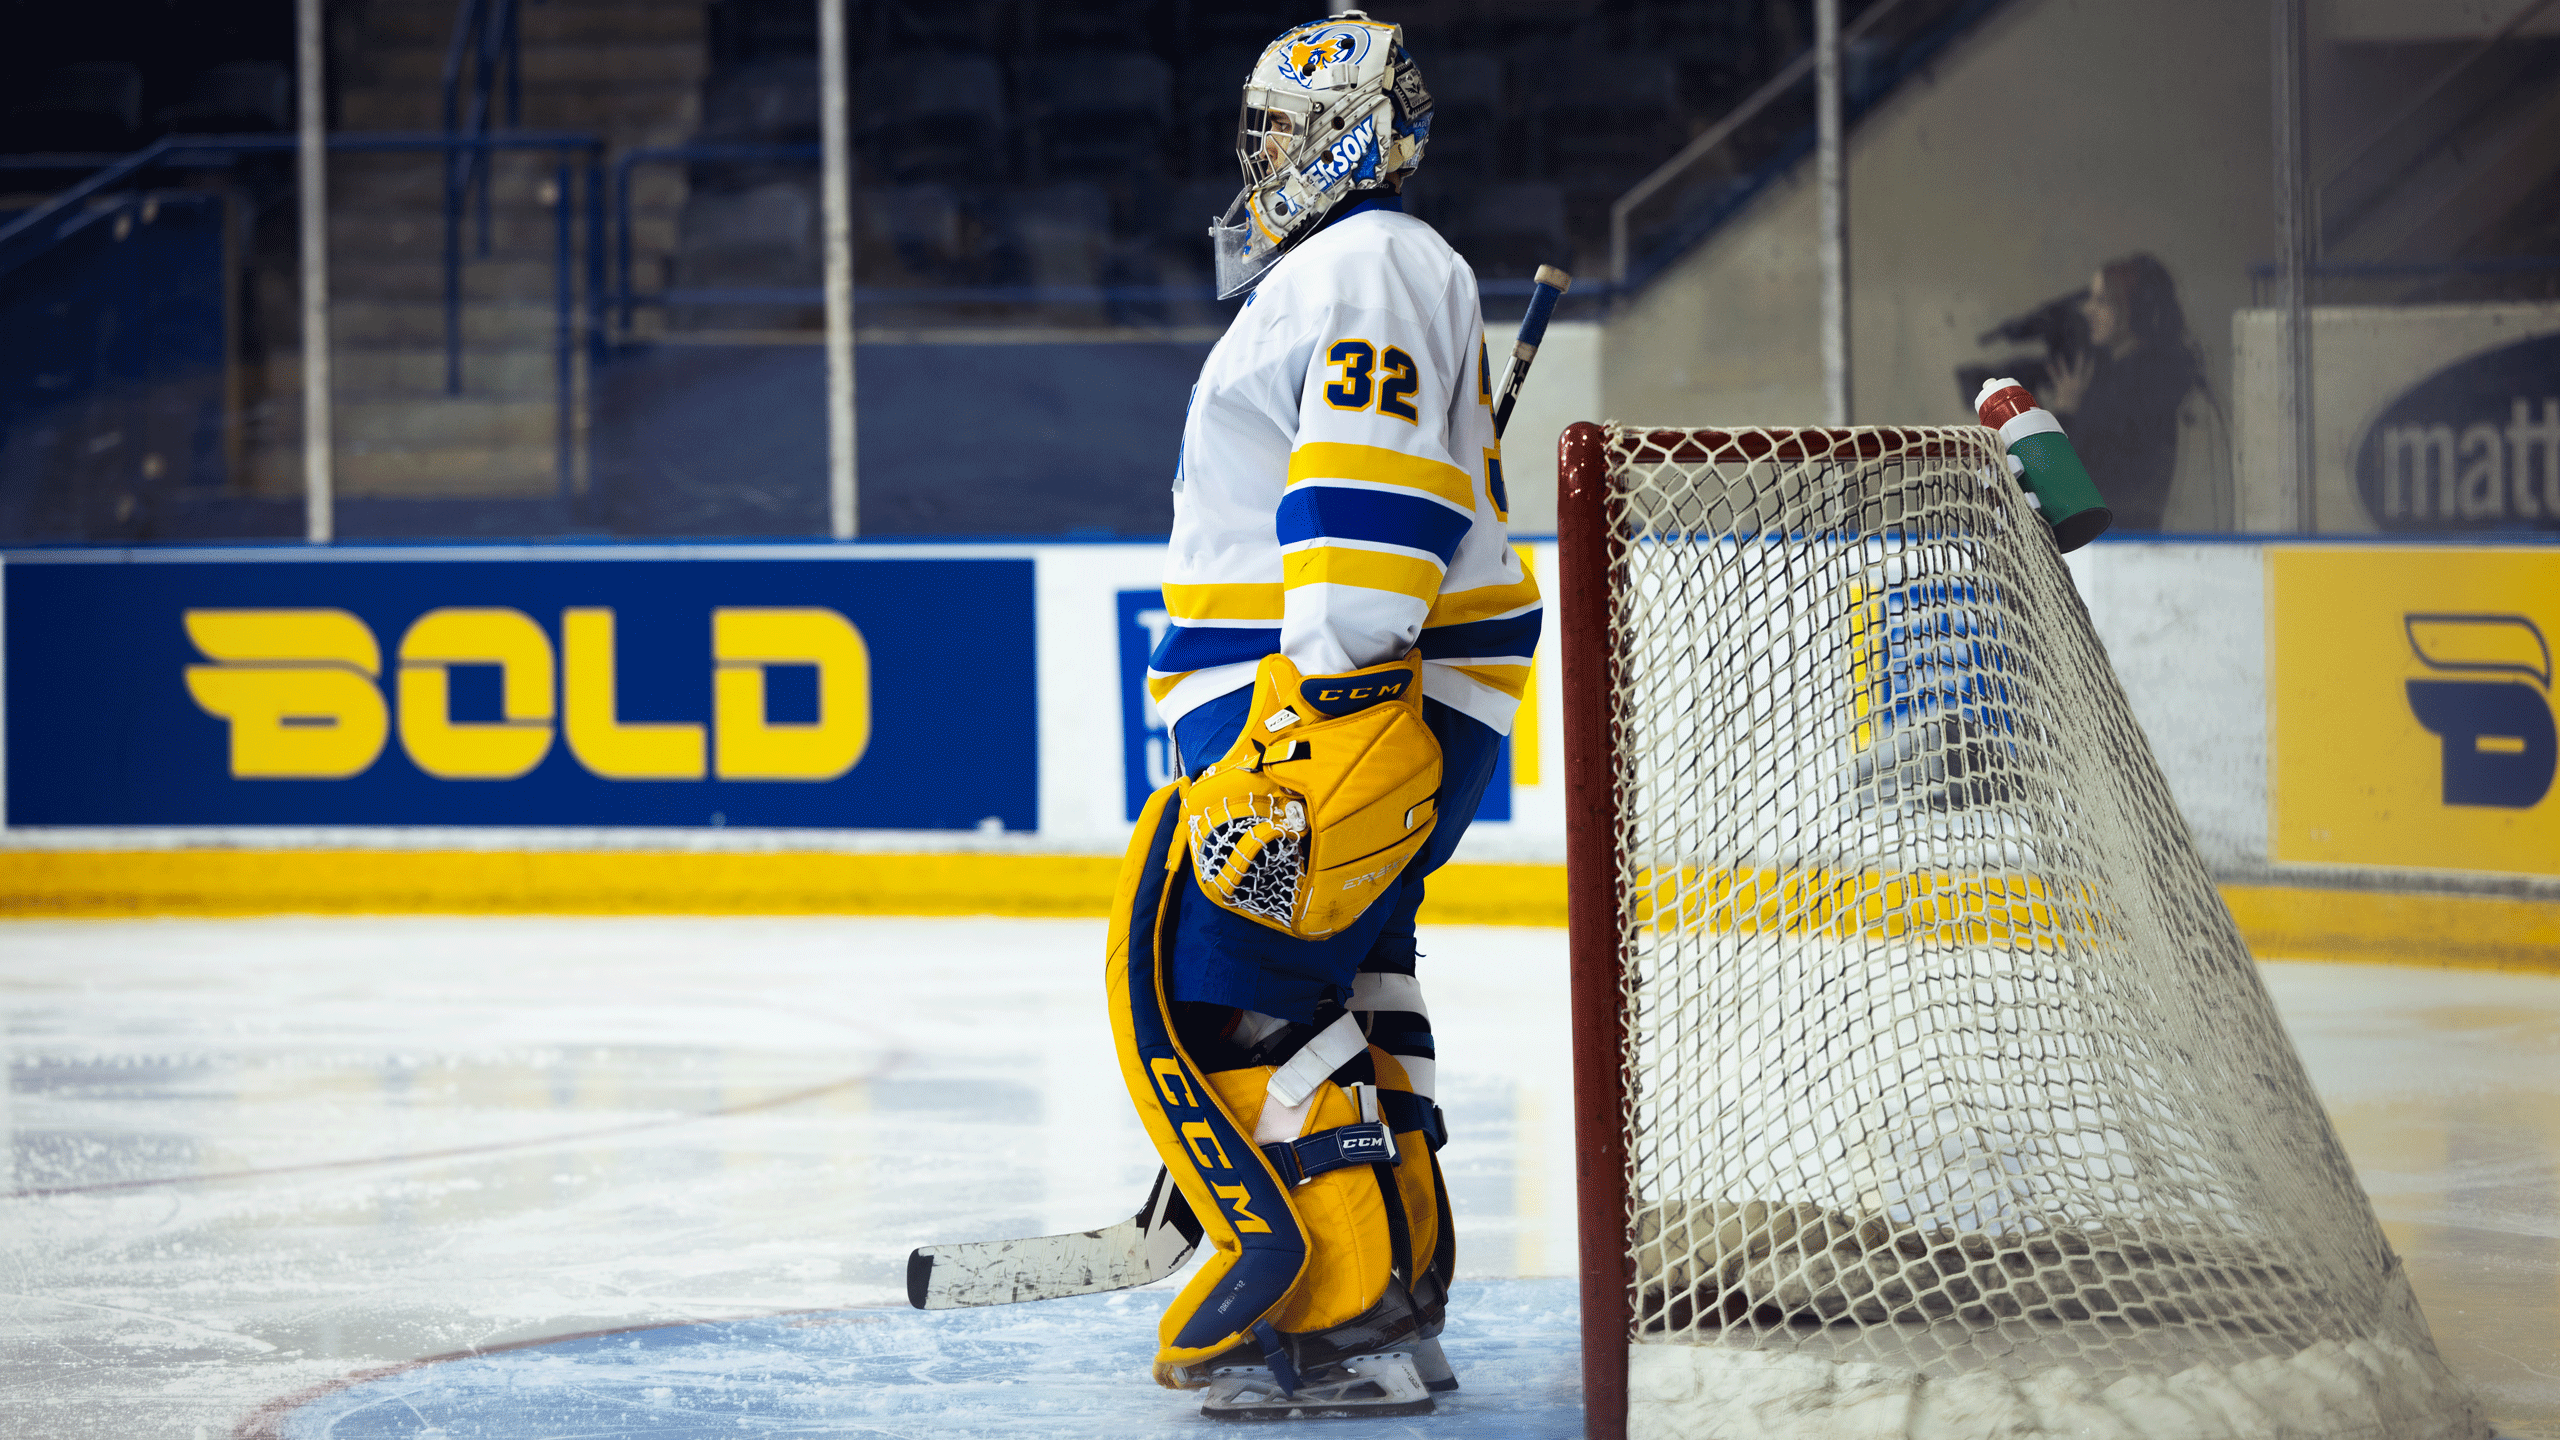 A hockey goalie with yellow pads and a white jersey stands in the crease